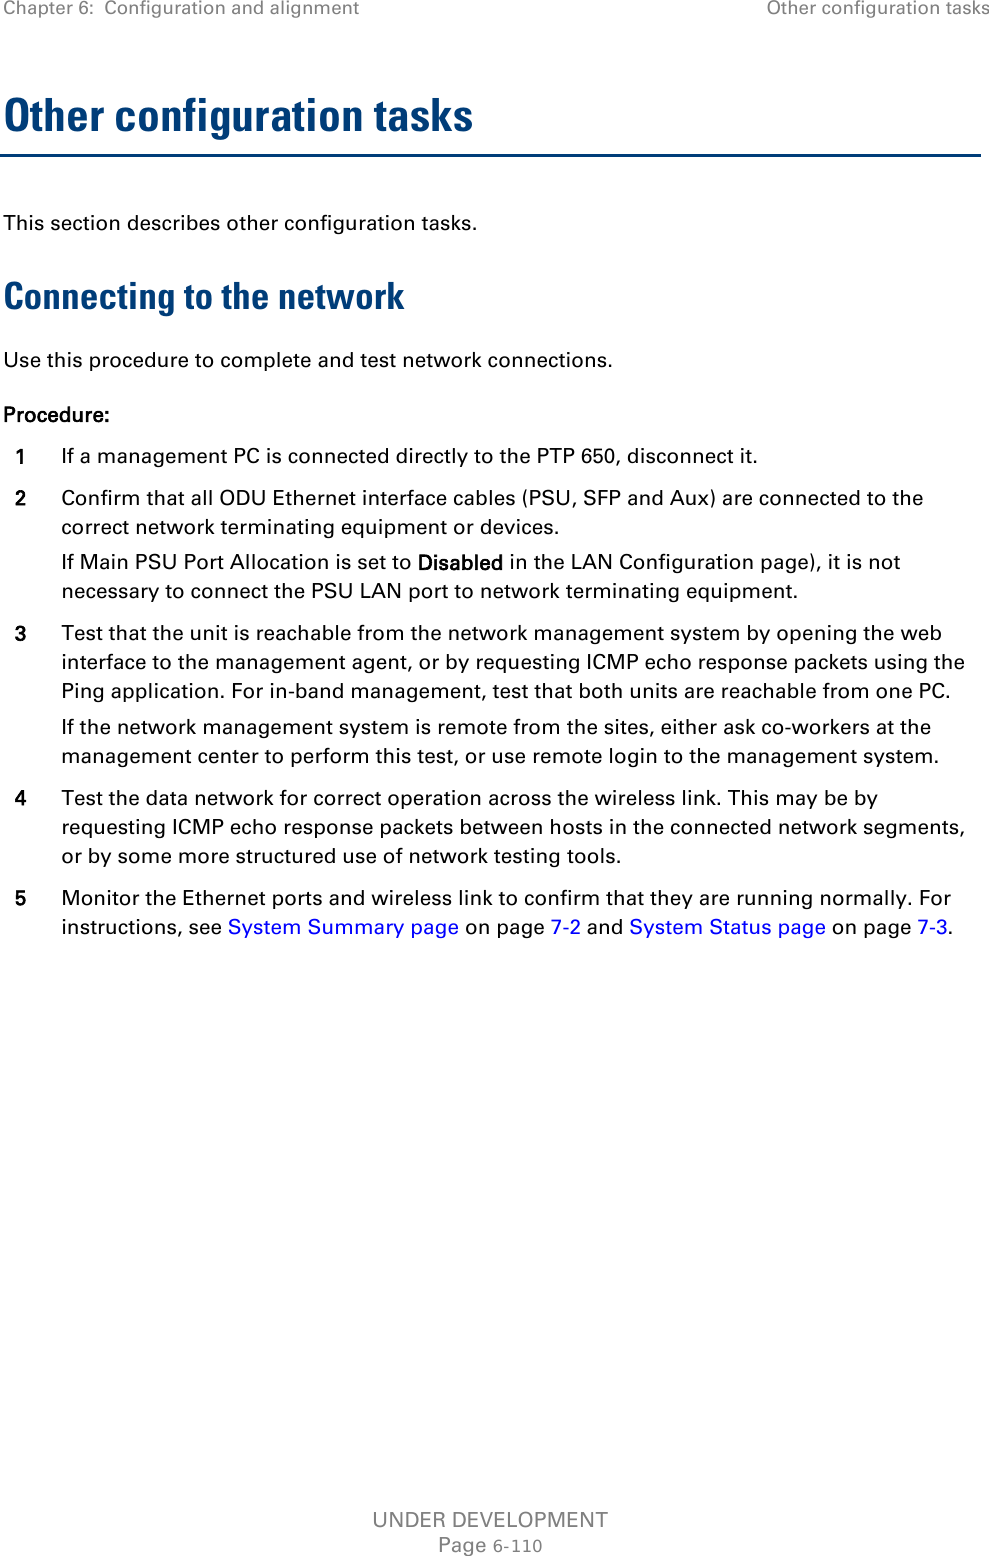 Chapter 6:  Configuration and alignment Other configuration tasks  Other configuration tasks This section describes other configuration tasks. Connecting to the network Use this procedure to complete and test network connections. Procedure: 1 If a management PC is connected directly to the PTP 650, disconnect it. 2 Confirm that all ODU Ethernet interface cables (PSU, SFP and Aux) are connected to the correct network terminating equipment or devices. If Main PSU Port Allocation is set to Disabled in the LAN Configuration page), it is not necessary to connect the PSU LAN port to network terminating equipment. 3 Test that the unit is reachable from the network management system by opening the web interface to the management agent, or by requesting ICMP echo response packets using the Ping application. For in-band management, test that both units are reachable from one PC. If the network management system is remote from the sites, either ask co-workers at the management center to perform this test, or use remote login to the management system. 4 Test the data network for correct operation across the wireless link. This may be by requesting ICMP echo response packets between hosts in the connected network segments, or by some more structured use of network testing tools. 5 Monitor the Ethernet ports and wireless link to confirm that they are running normally. For instructions, see System Summary page on page 7-2 and System Status page on page 7-3.  UNDER DEVELOPMENT Page 6-110 